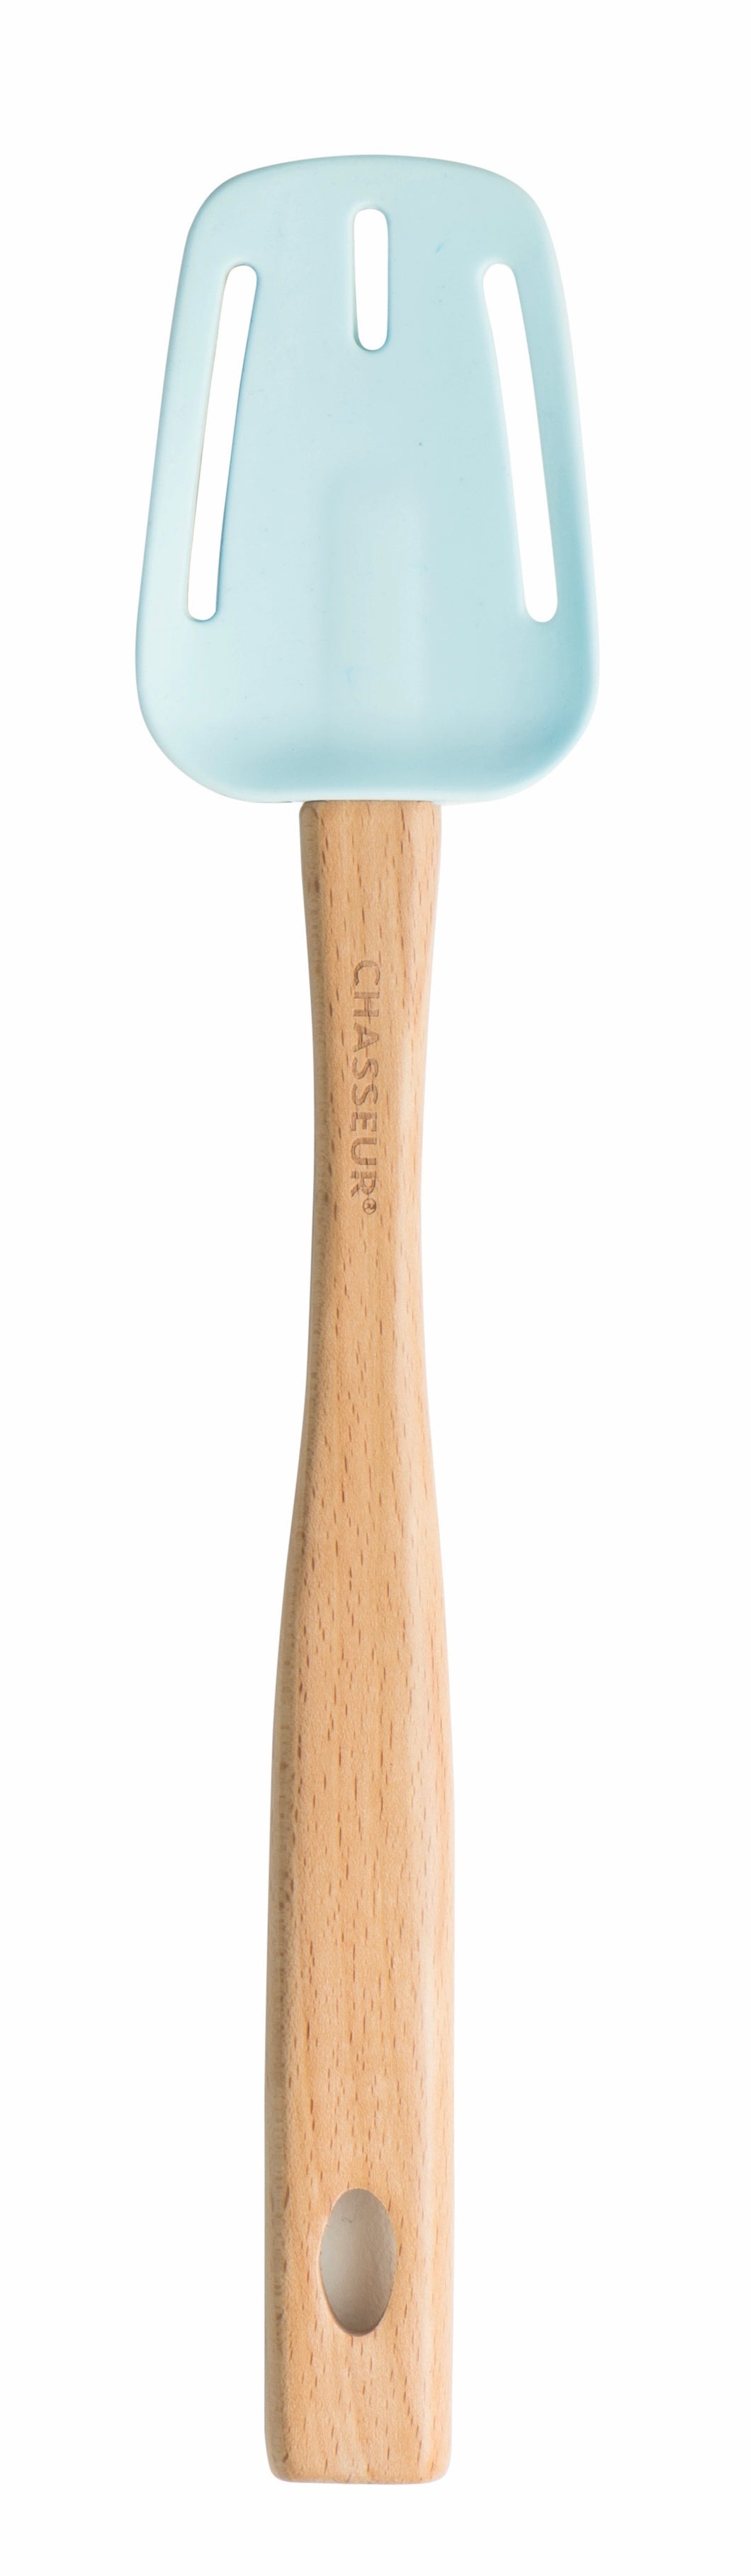 Chasseur Duck Egg Blue Silicone Slotted Spoon with Wooden Handle